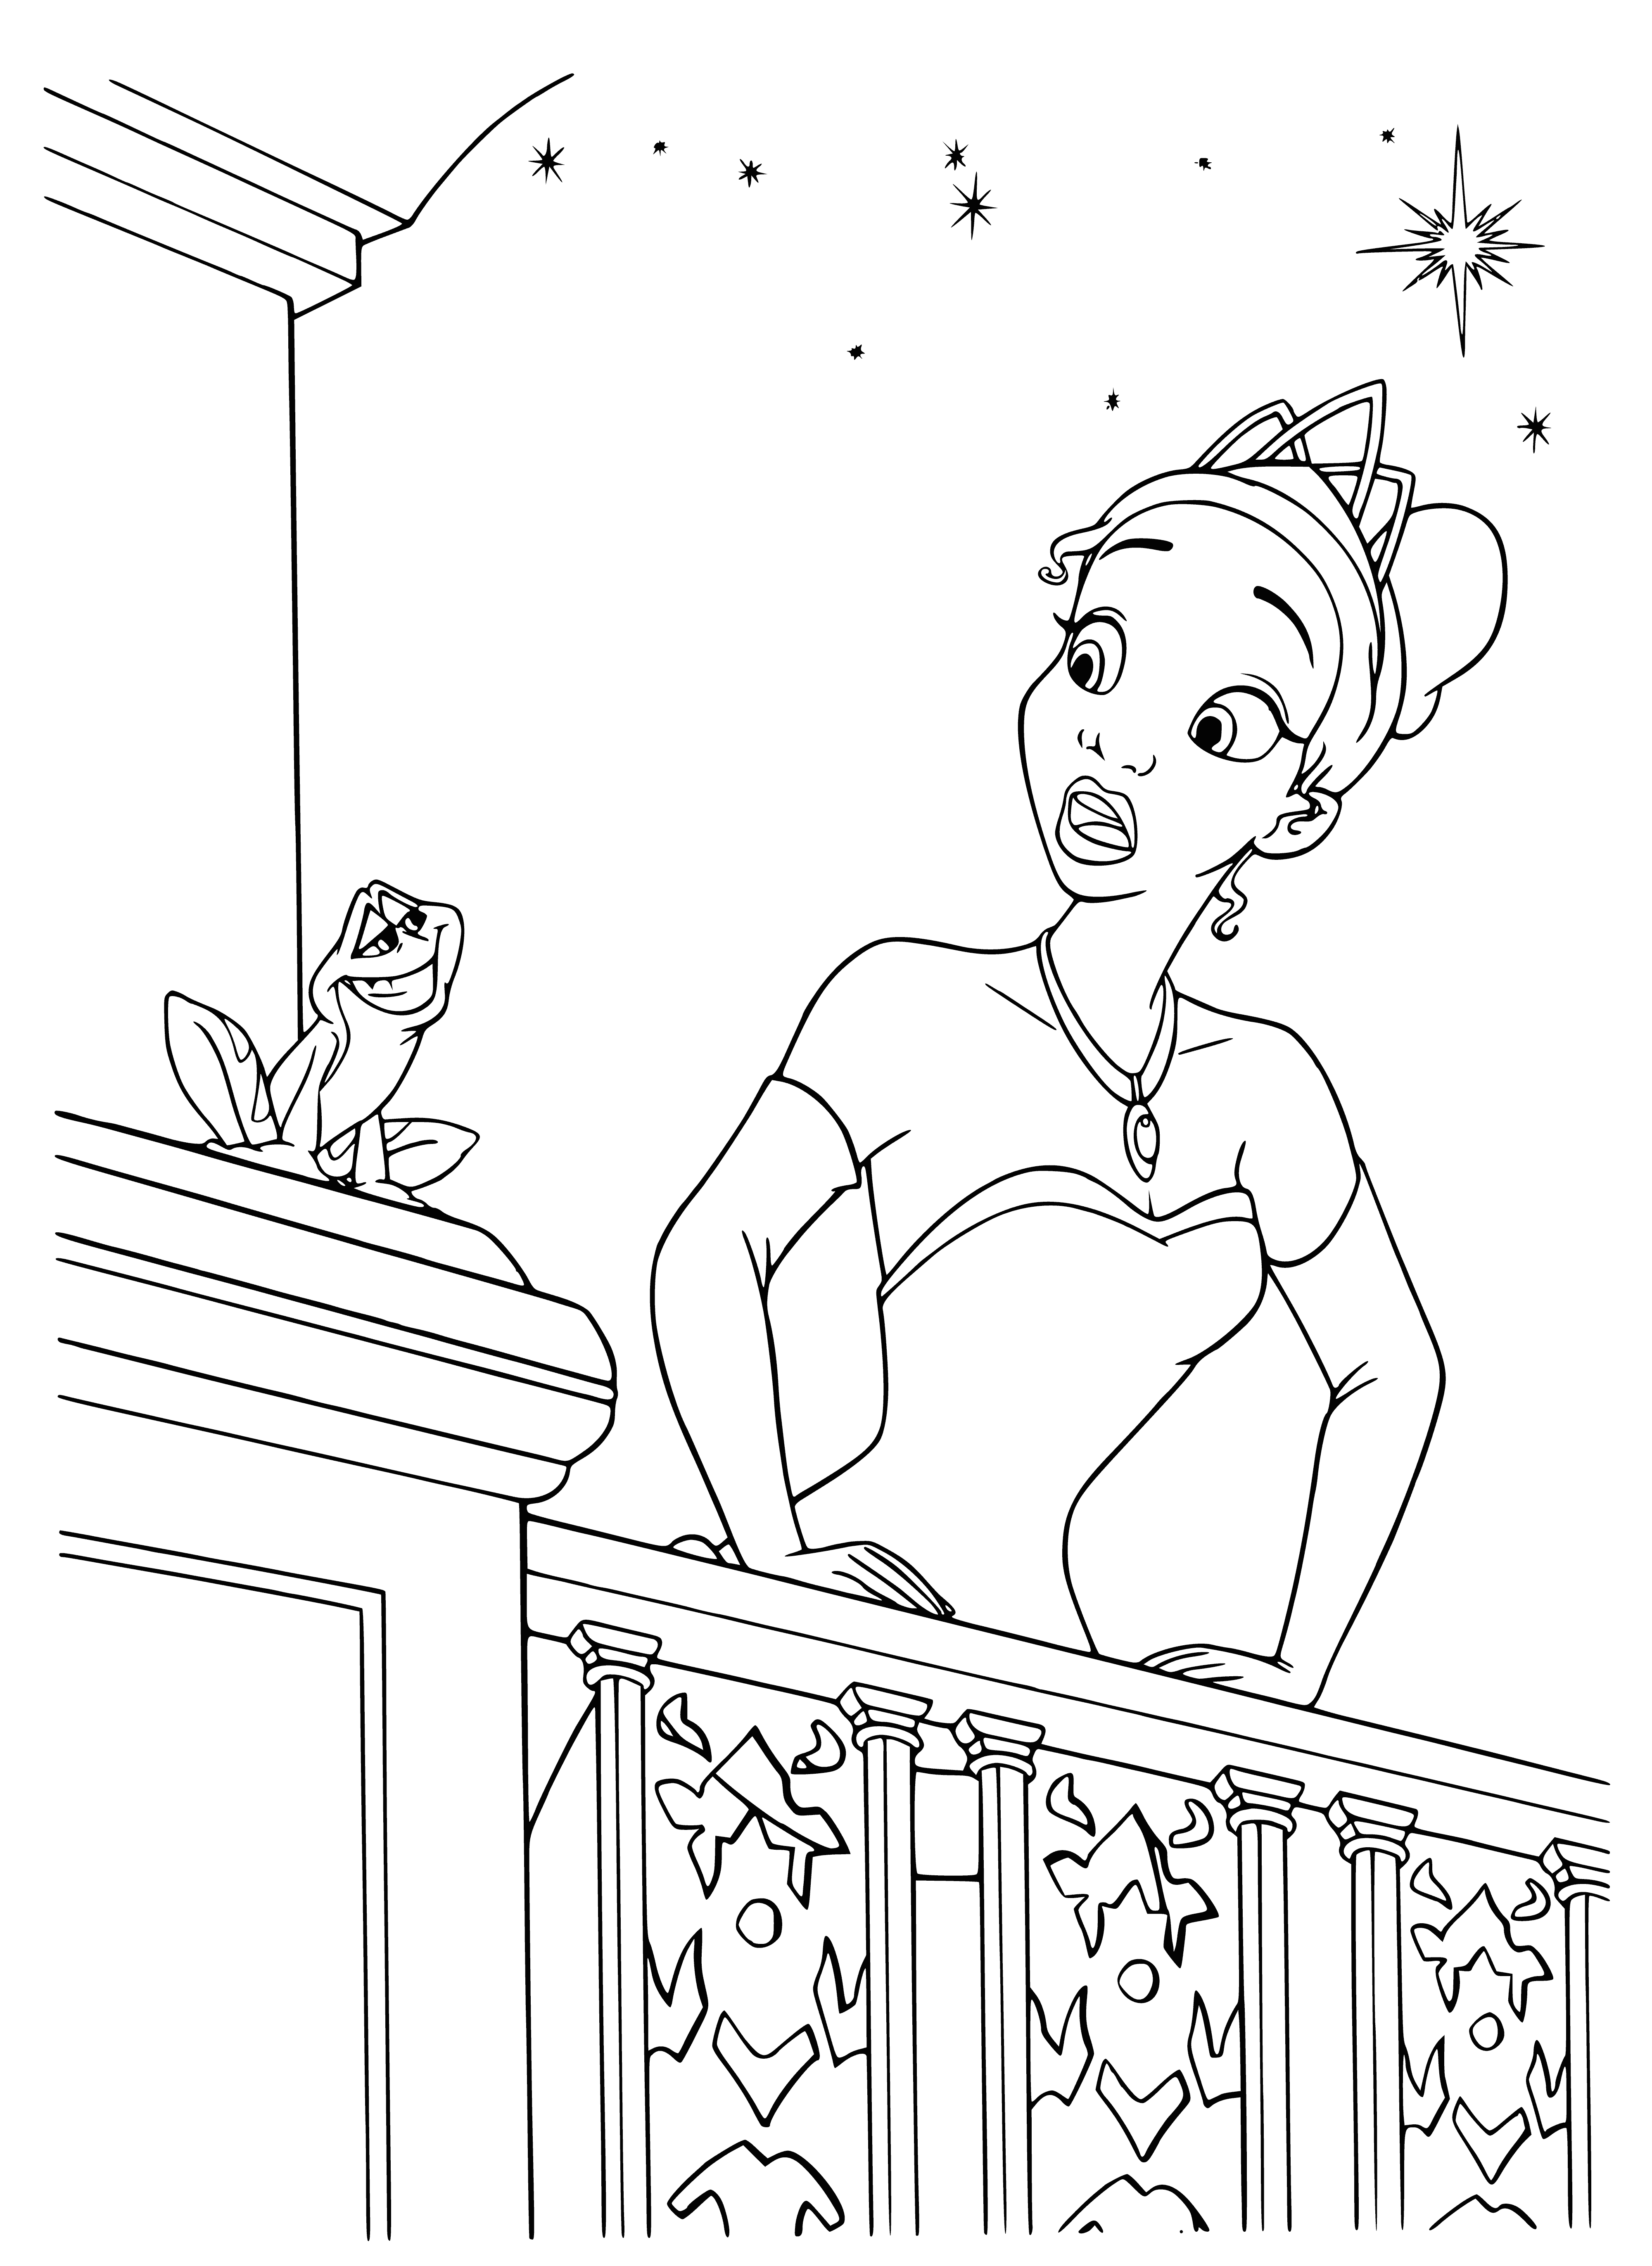 coloring page: Tiana stands before a frog in green & yellow, offering her hand. He wears a royal crown, making them appear to be equals.